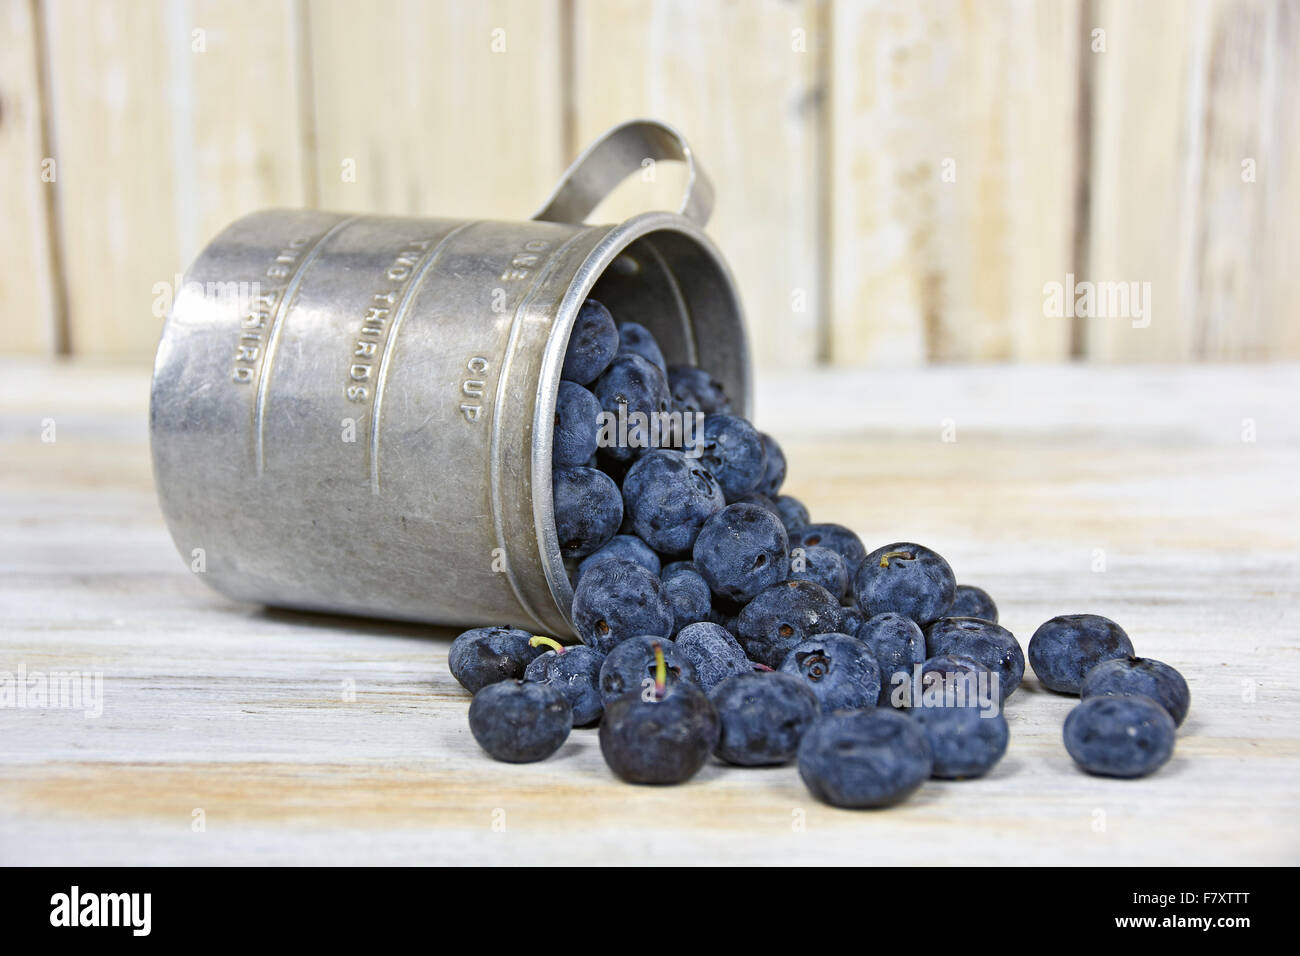 Ripe blueberries spilling out of a retro tin measuring cup on whitewashed wood. Stock Photo